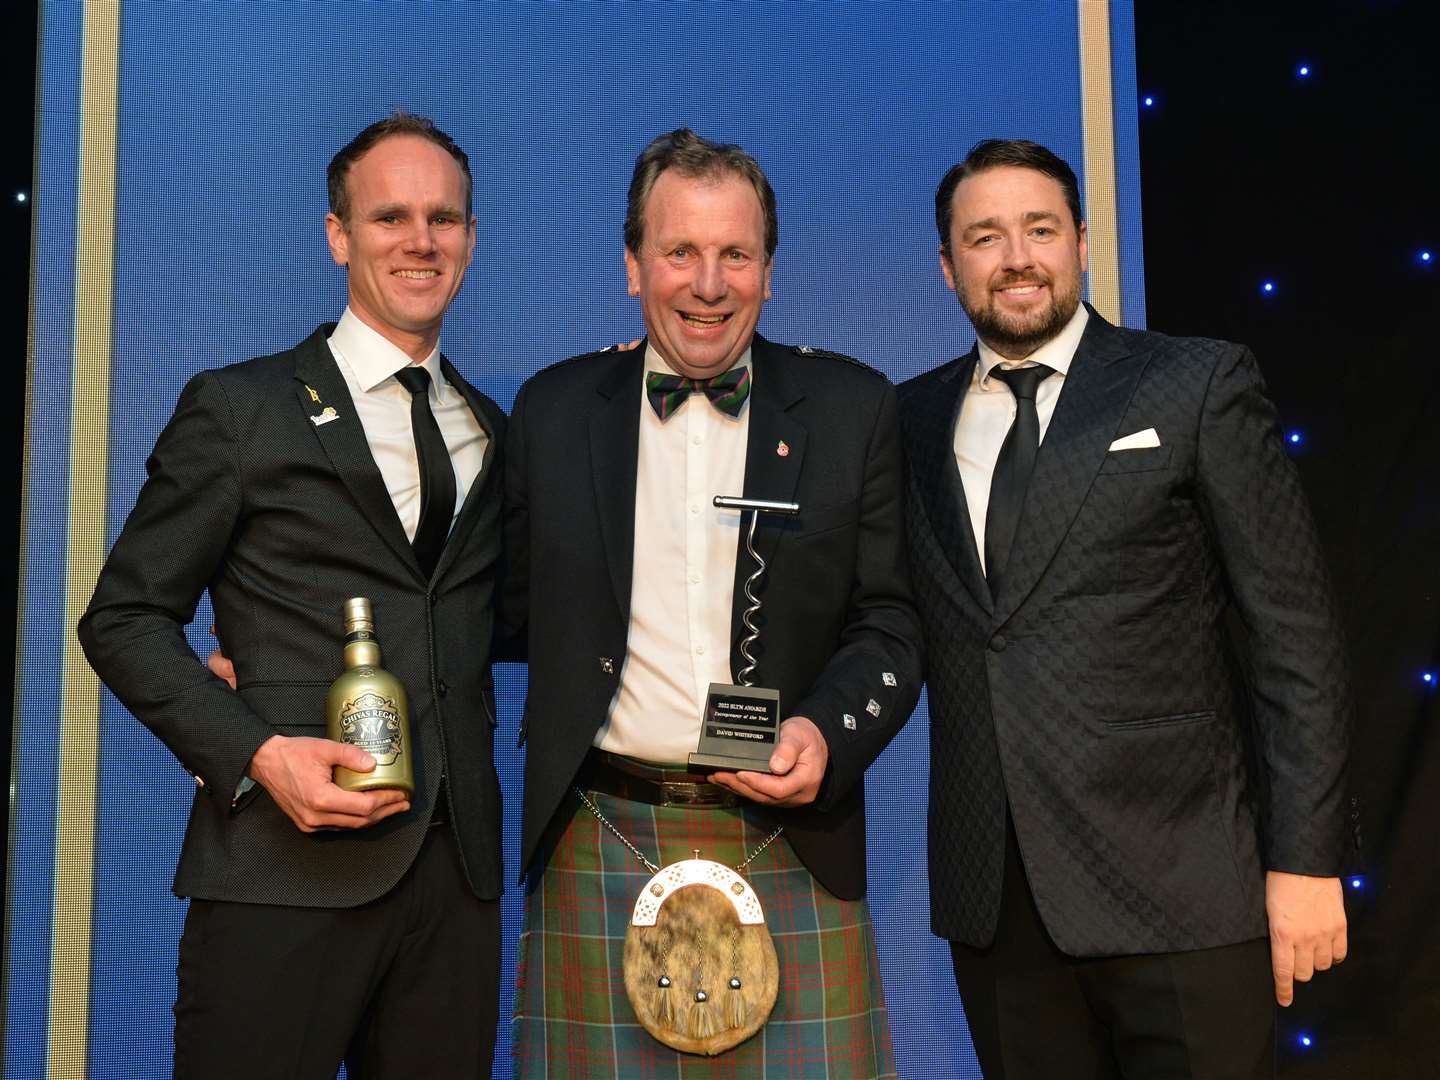 David Whiteford (centre) at the awards ceremony with Jason Manford (right) and Mike Phillips, regional manger for Chivas Regal.